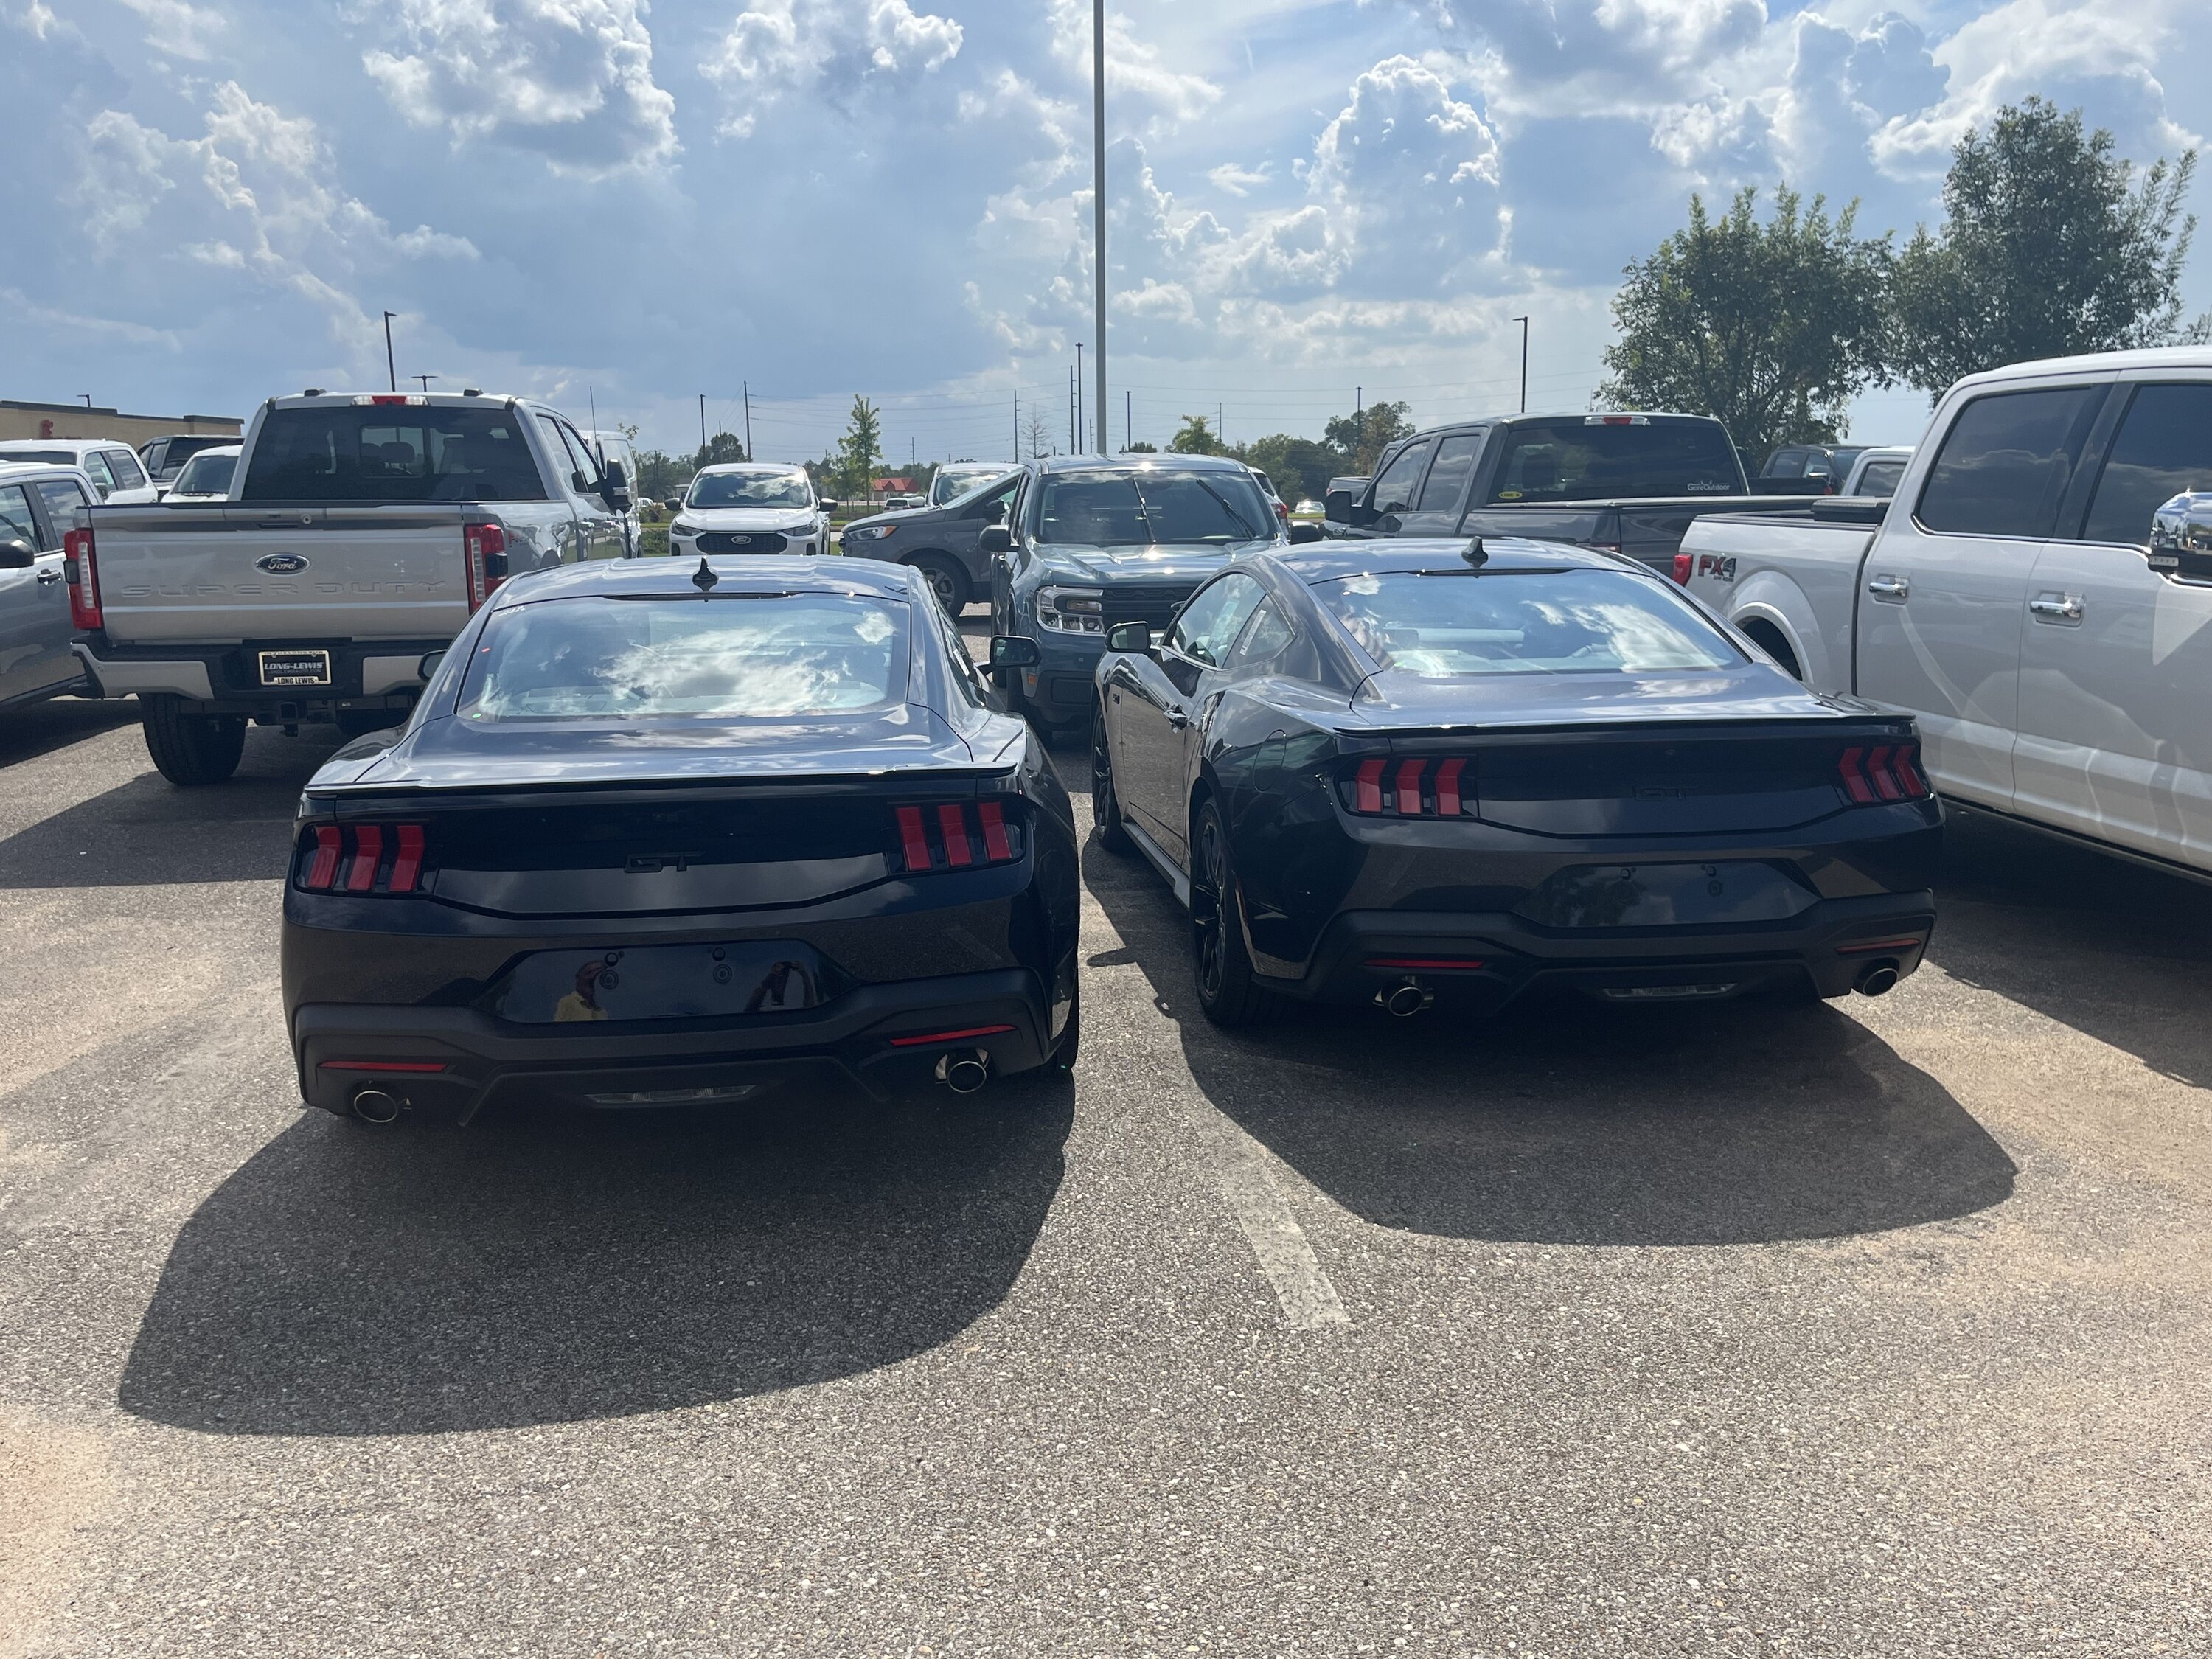 S650 Mustang Dealer just unexpectedly received 4 GTs!! IMG_7925